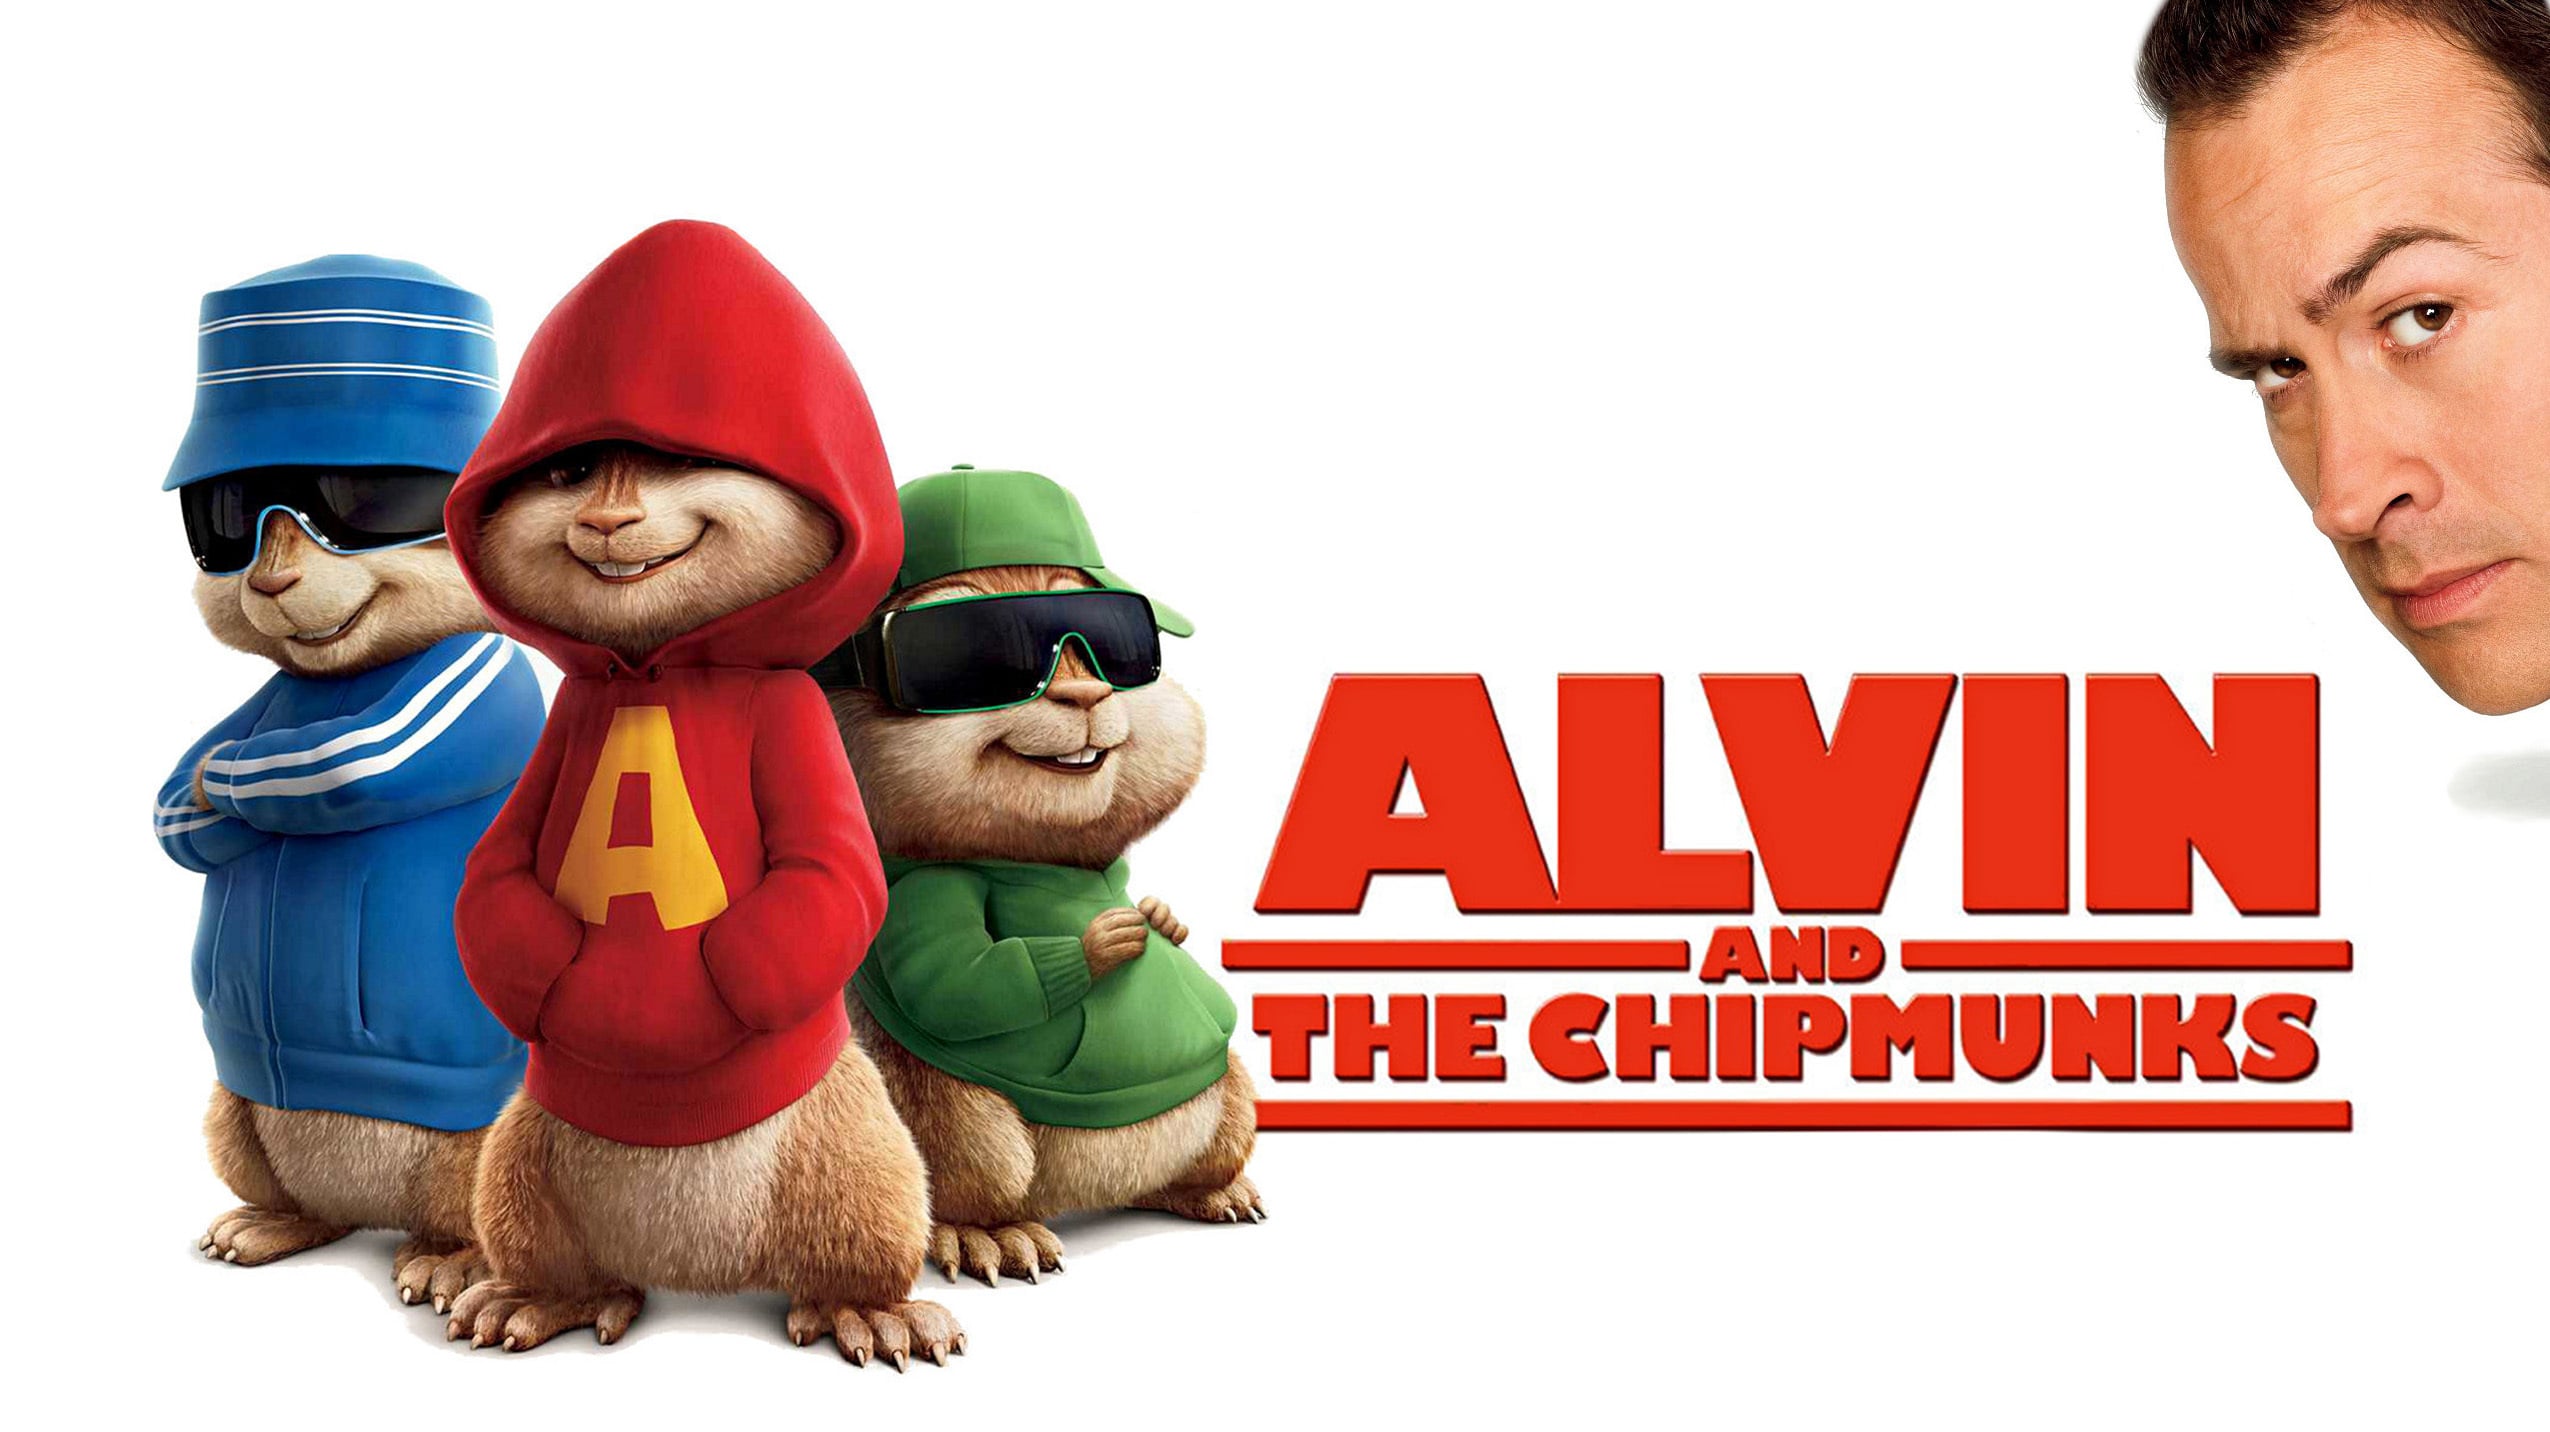 Alvin and the Chipmunks. 